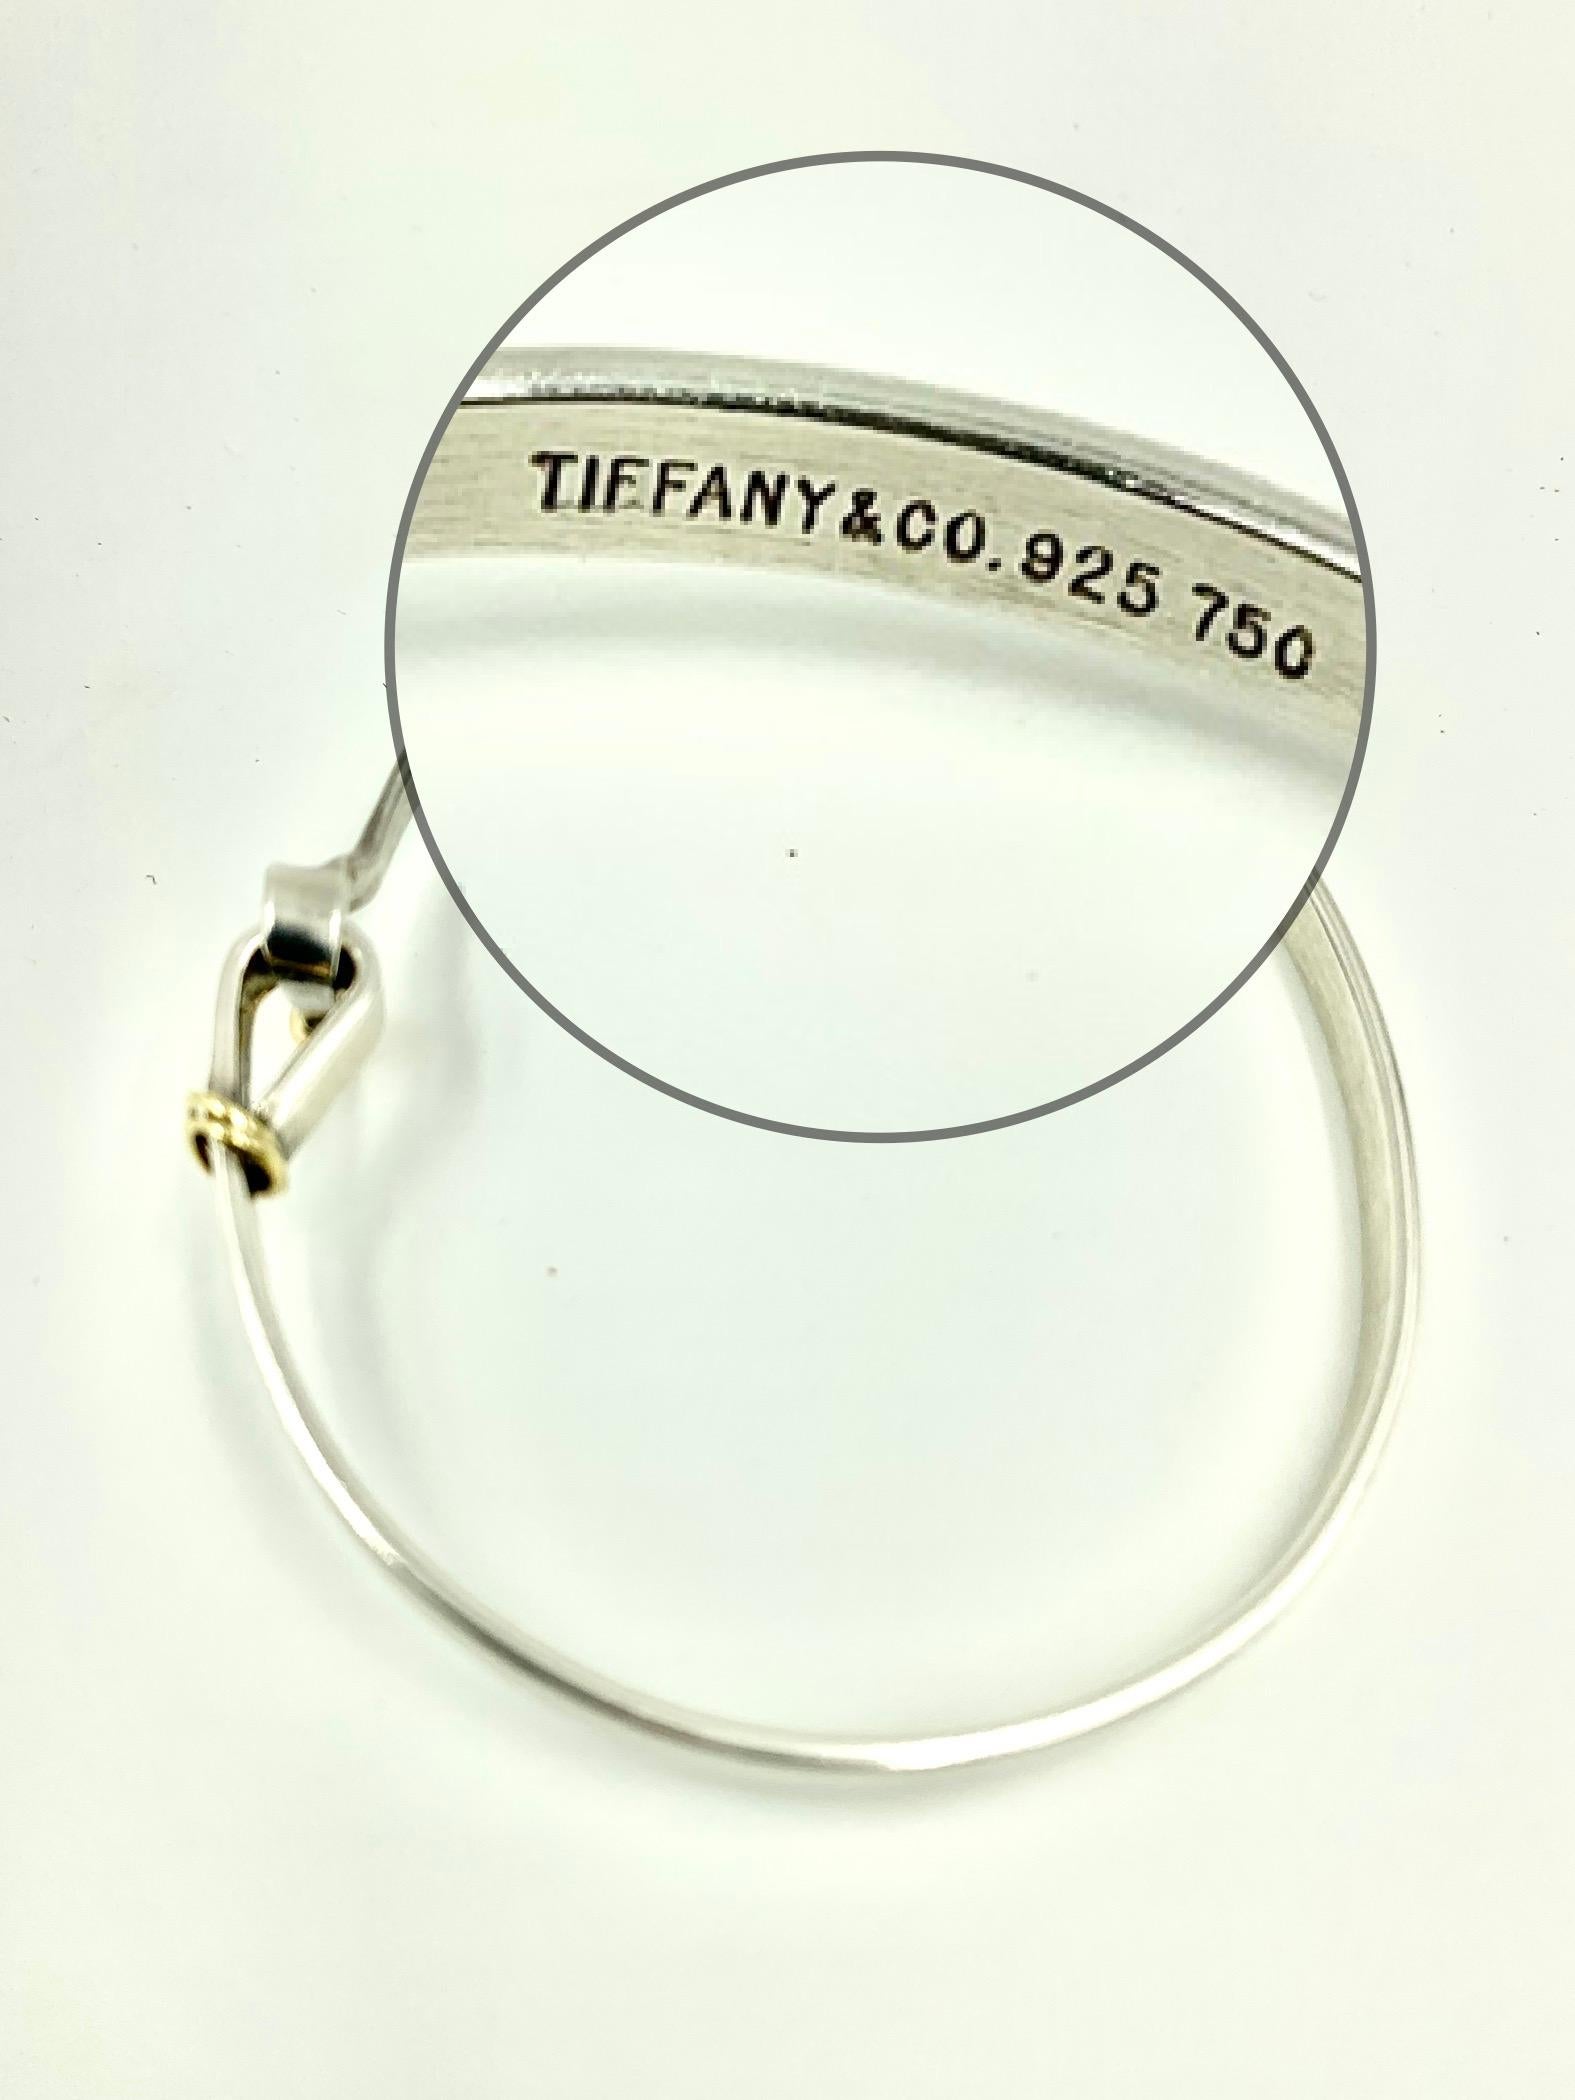 Tiffany & Co. sterling silver and 18K yellow gold Hook and Eye bangle bracelet in excellent estate condition.
Marks: Tiffany & Co., 925, 750
Circumference: 7.5 inches
Width of hook: .44 inches
Weight: 12.6 grams
This piece will arrive in the